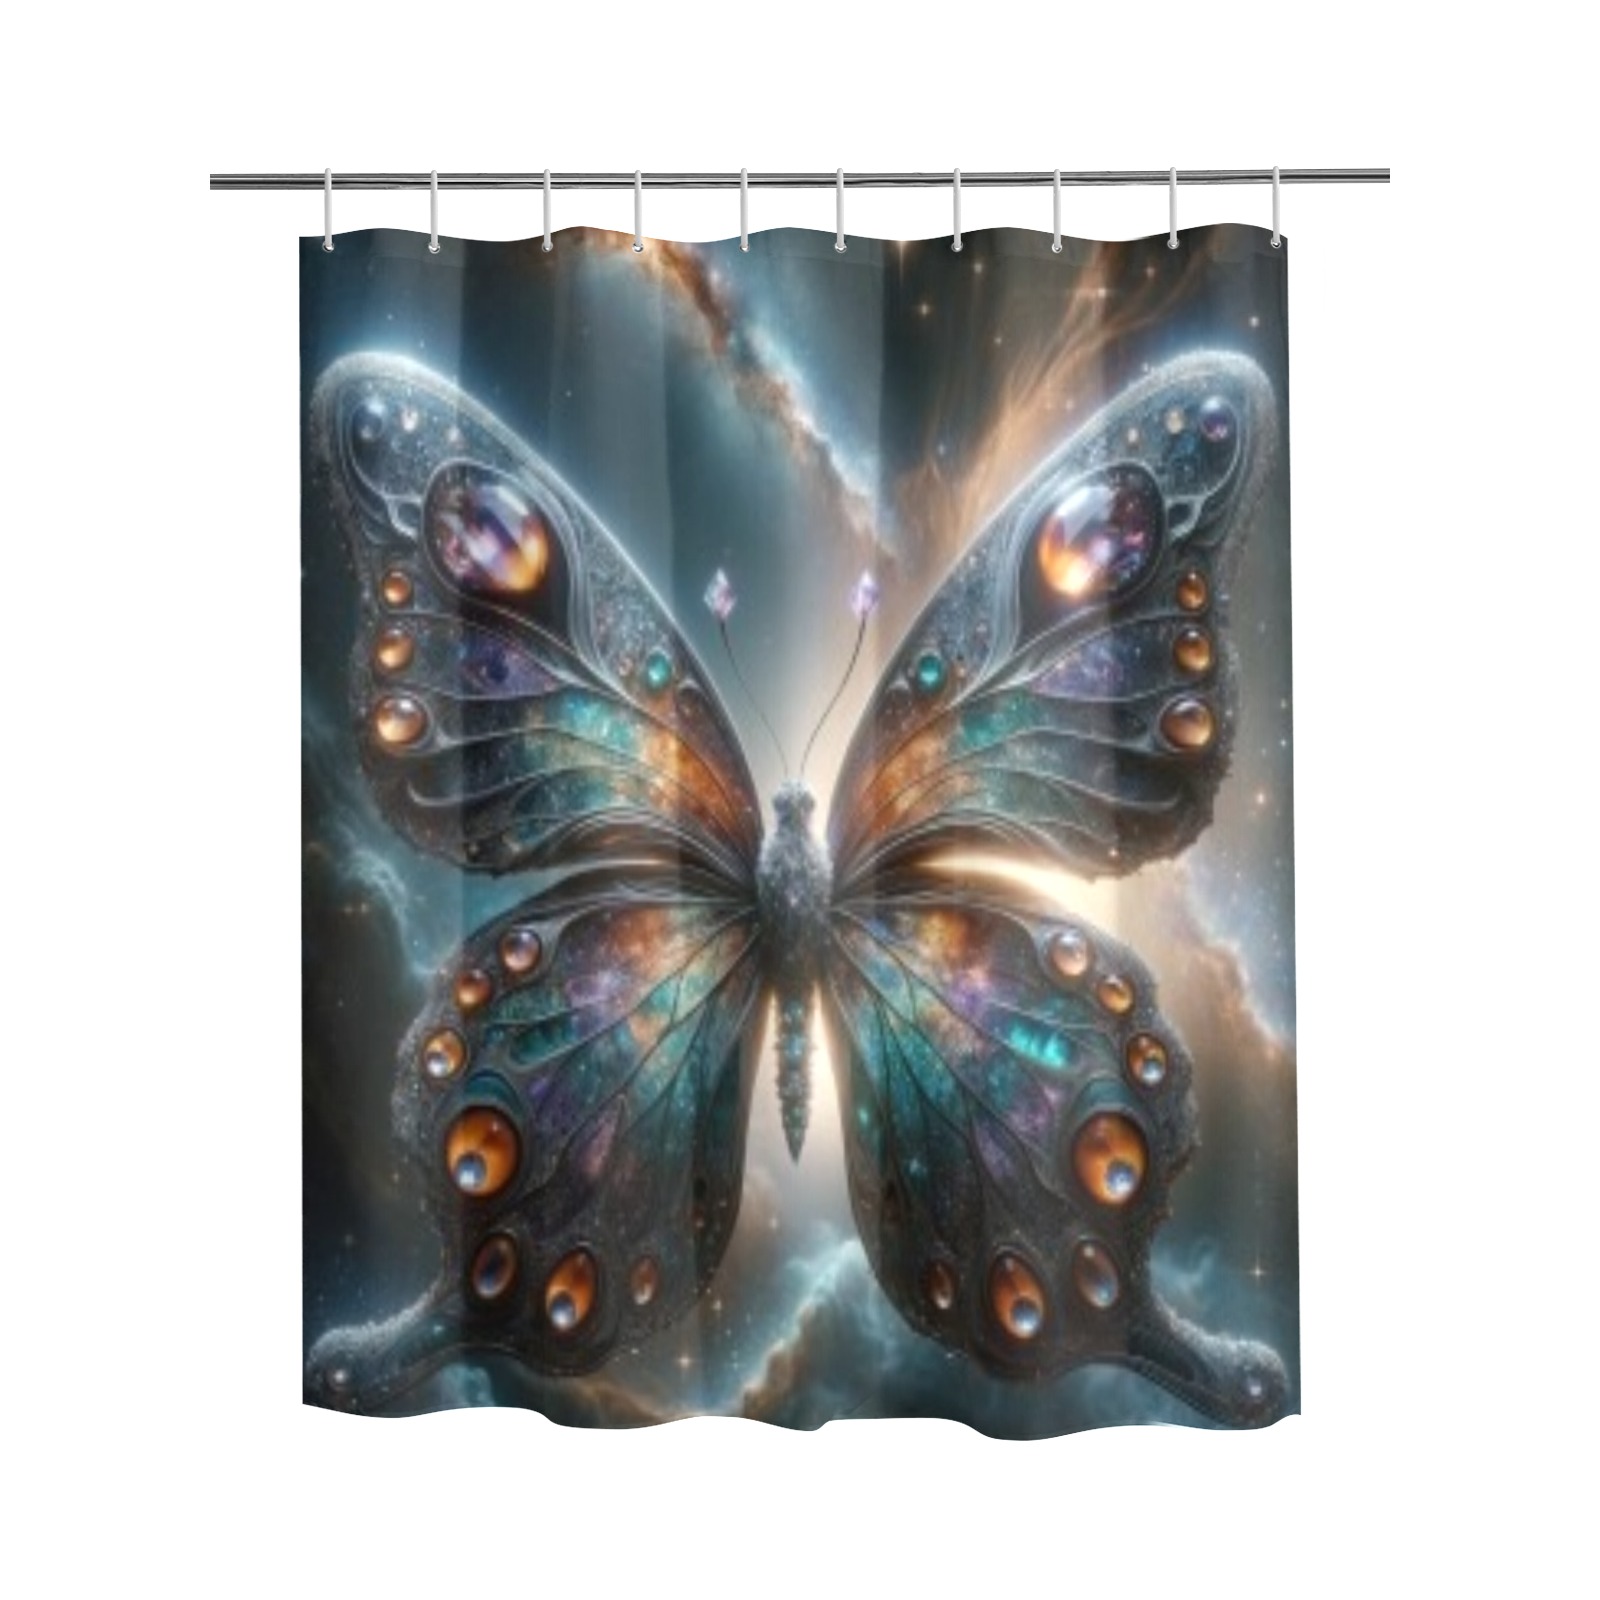 Steel Gray Butterfly Shower Curtain Shower Curtain 60"x72"